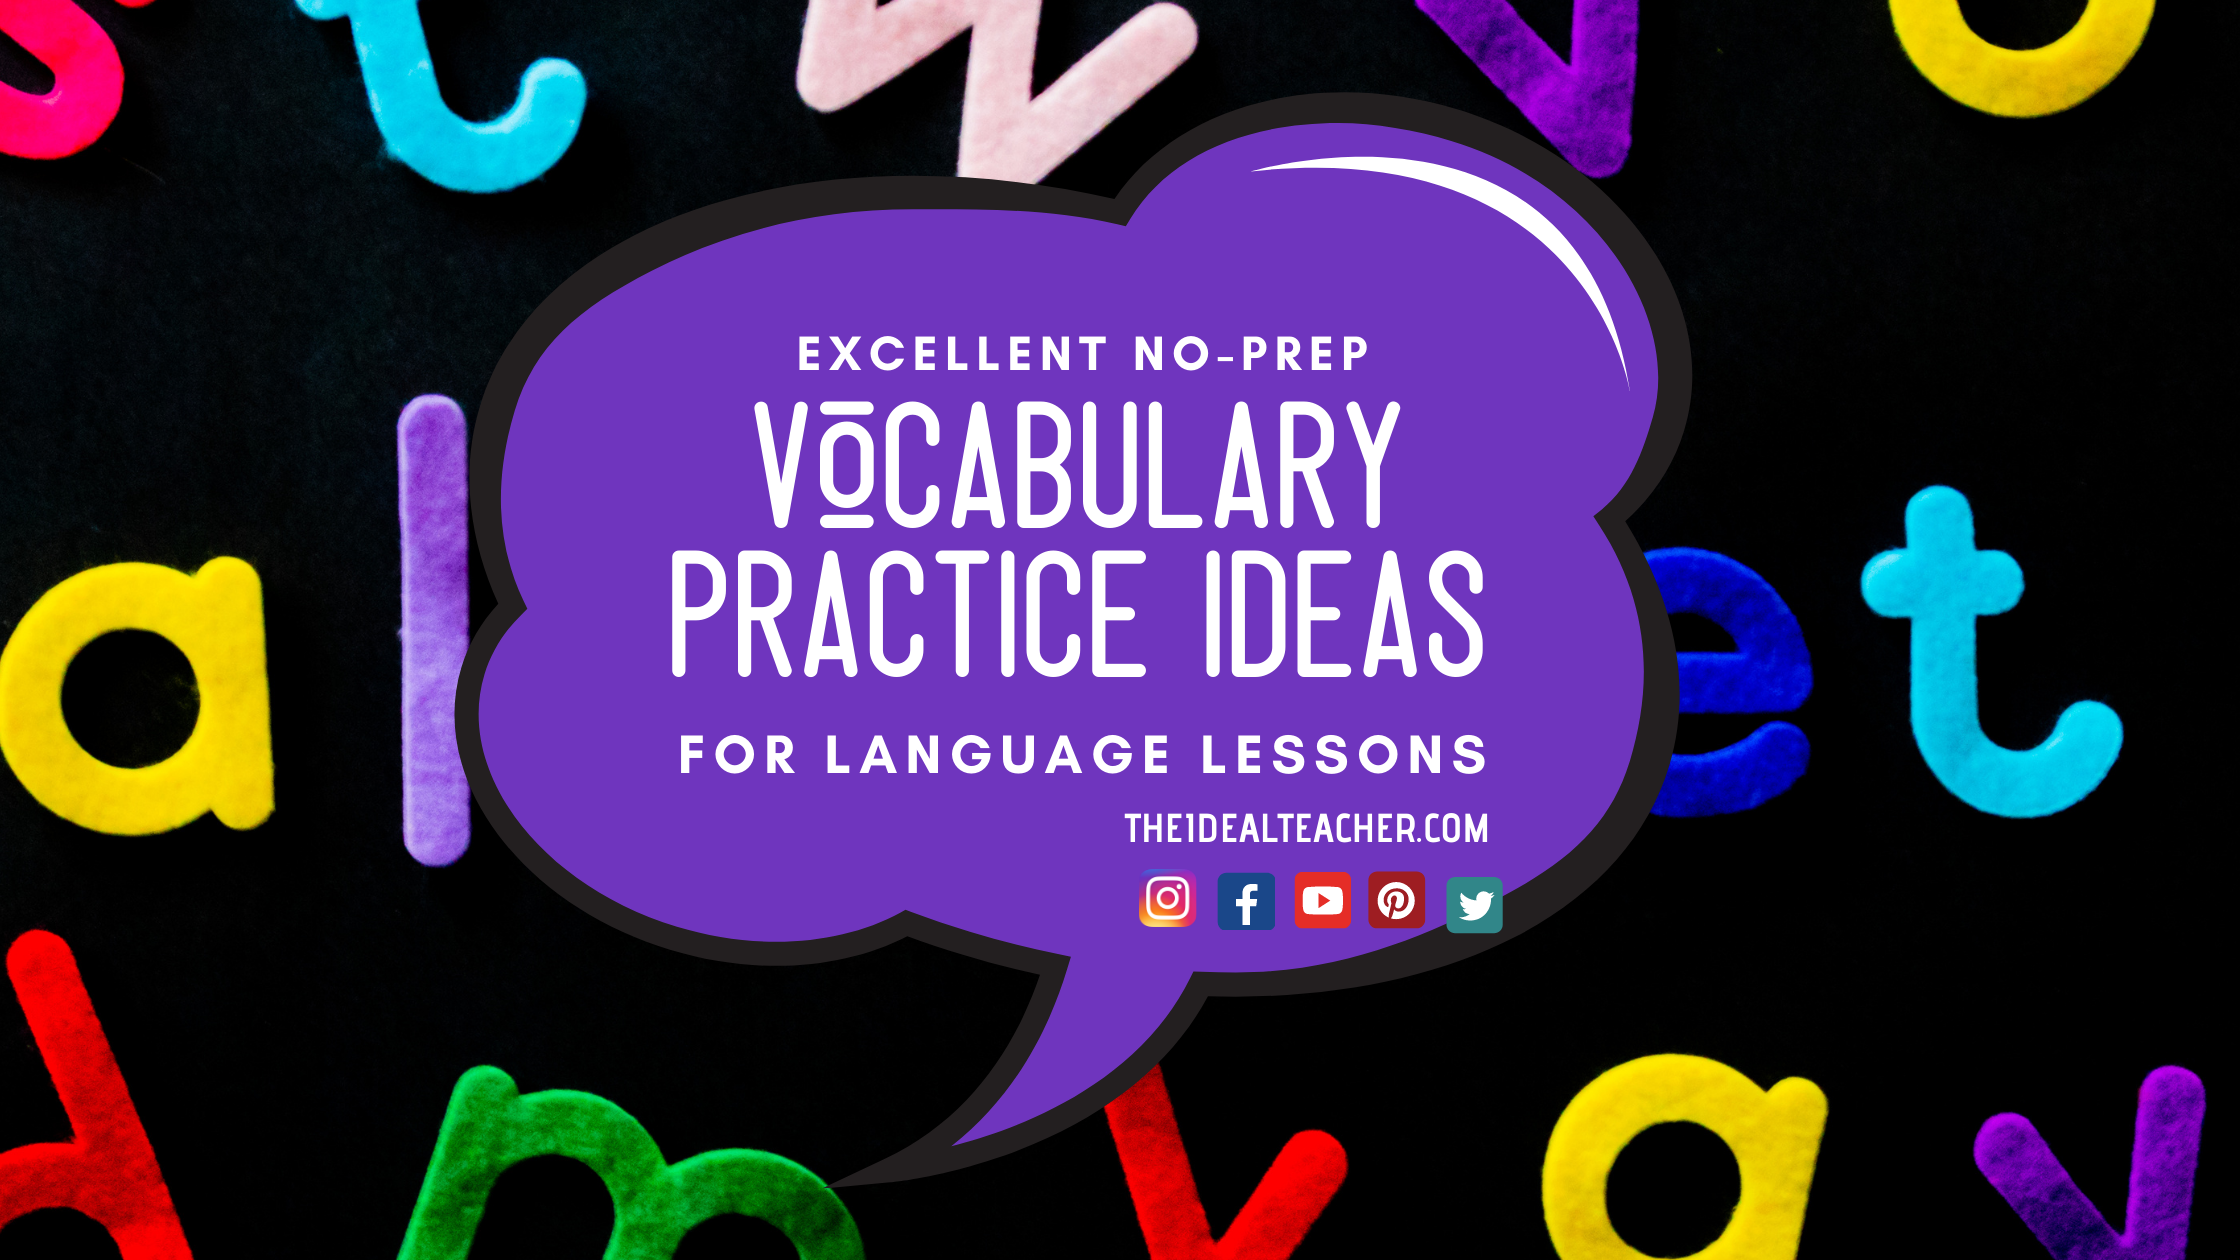 Excellent Ideas To Practise Vocabulary in the Language Classroom